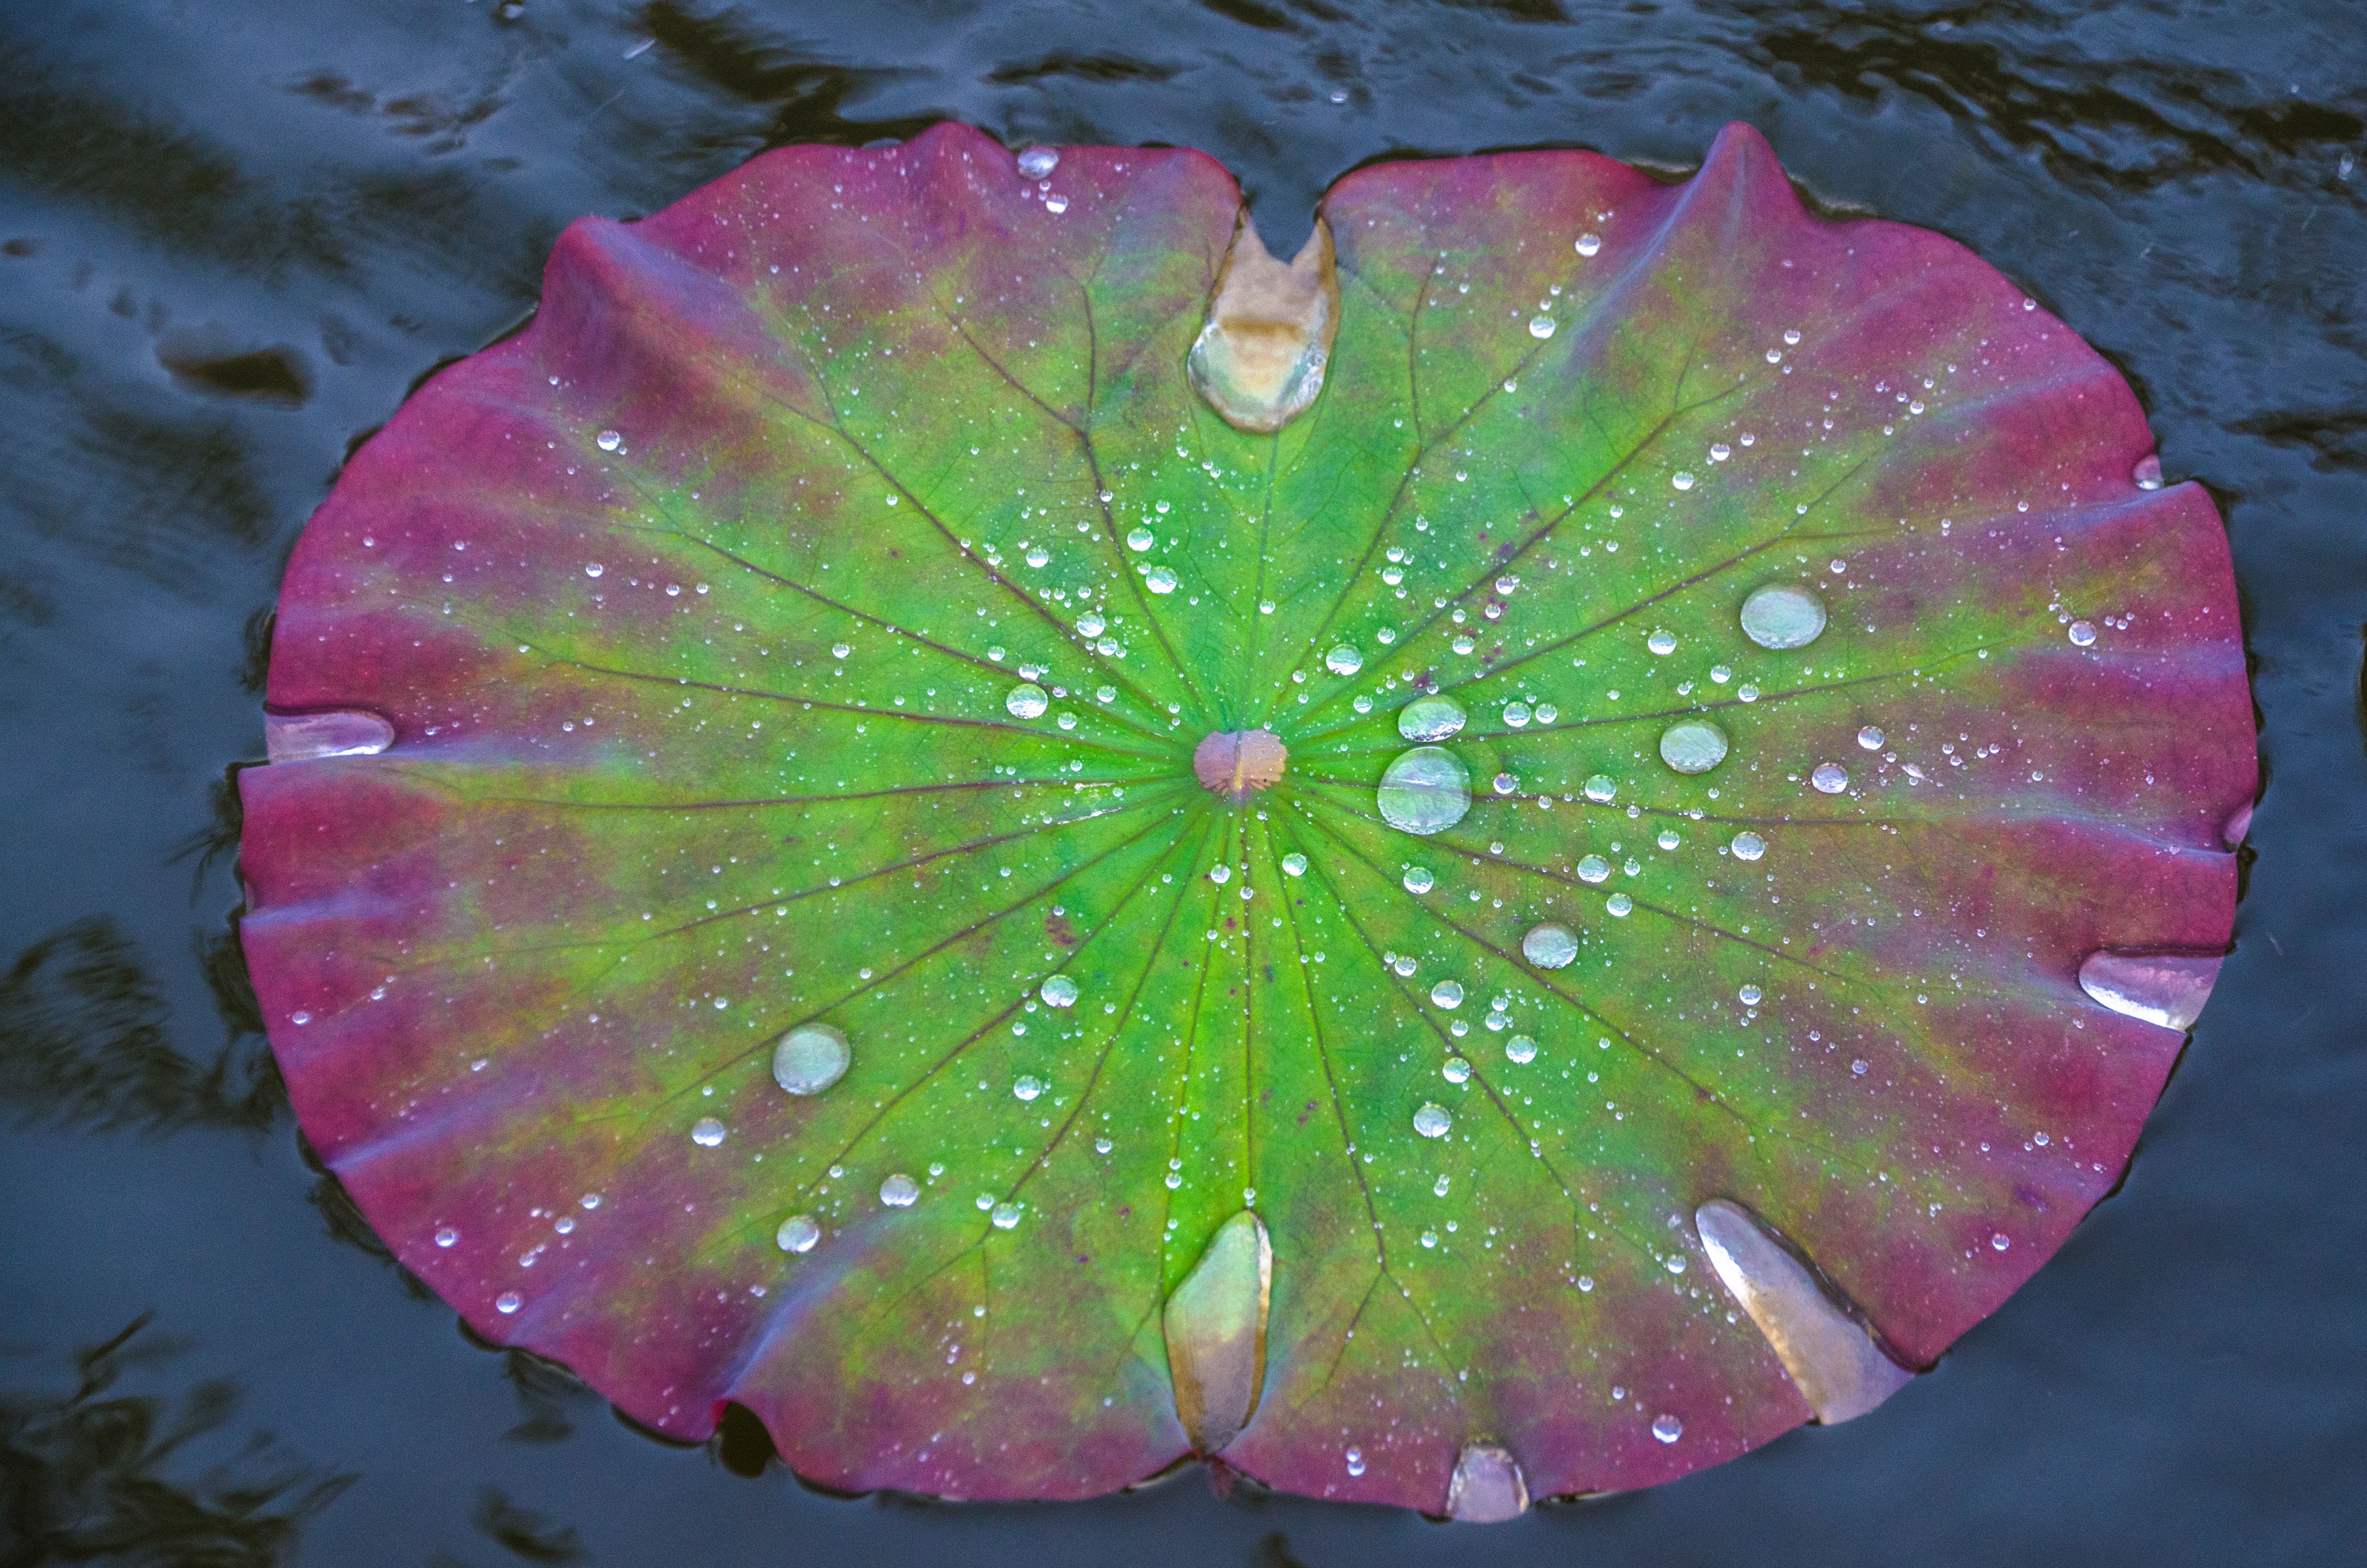 Droplets on Lily Pad, Thailand